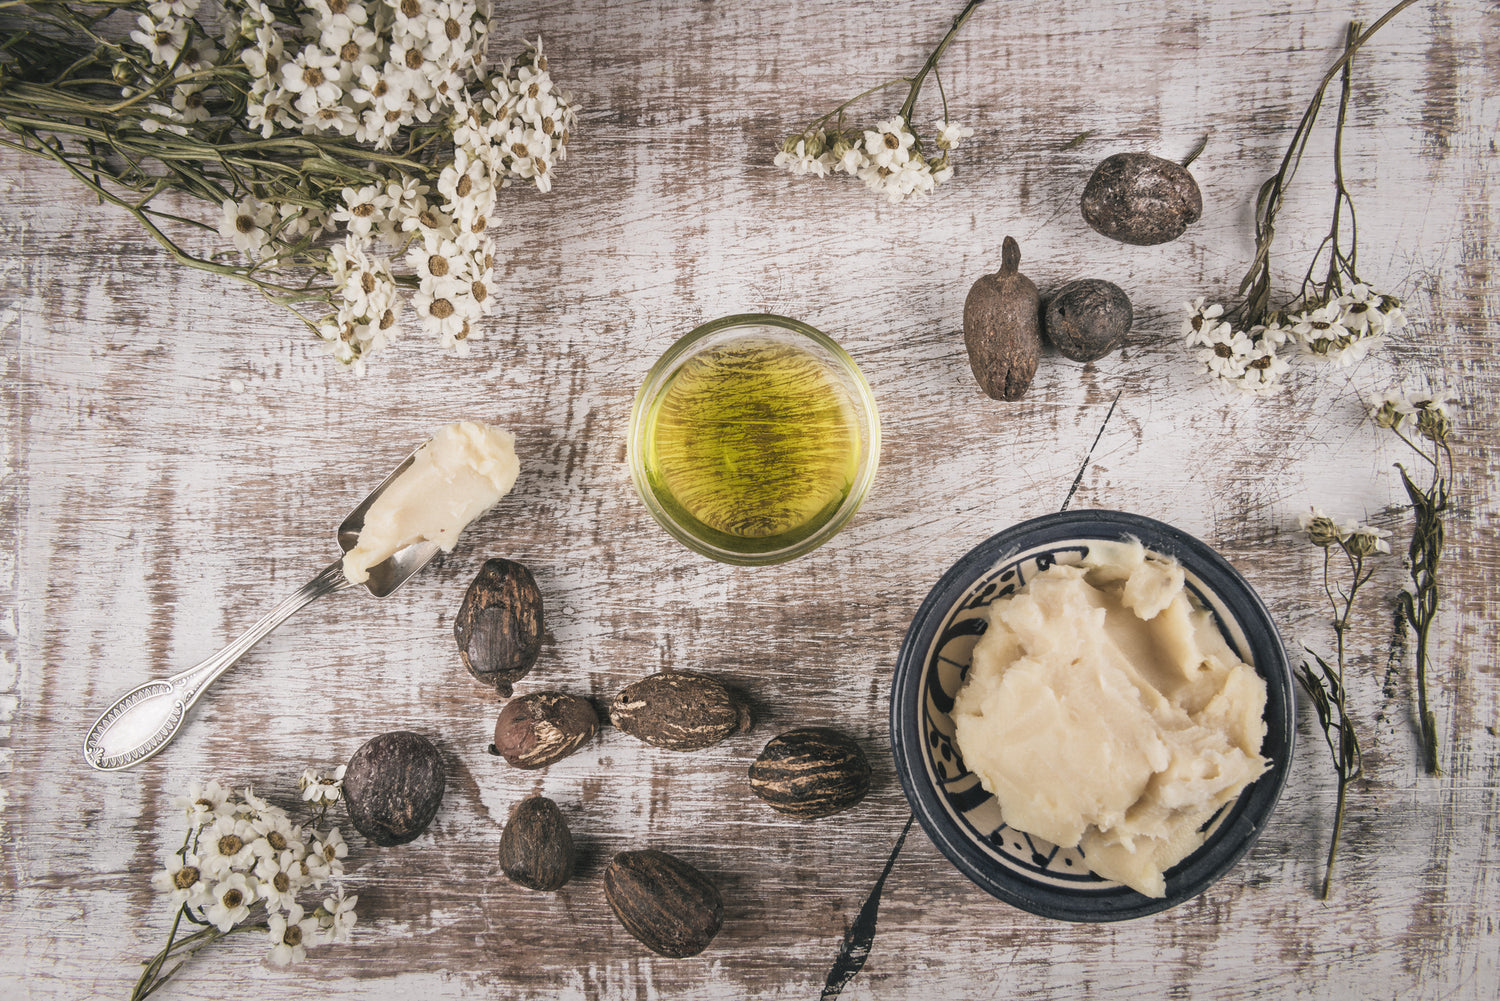 Shea Olein for Beards: What is it and What are the Benefits?